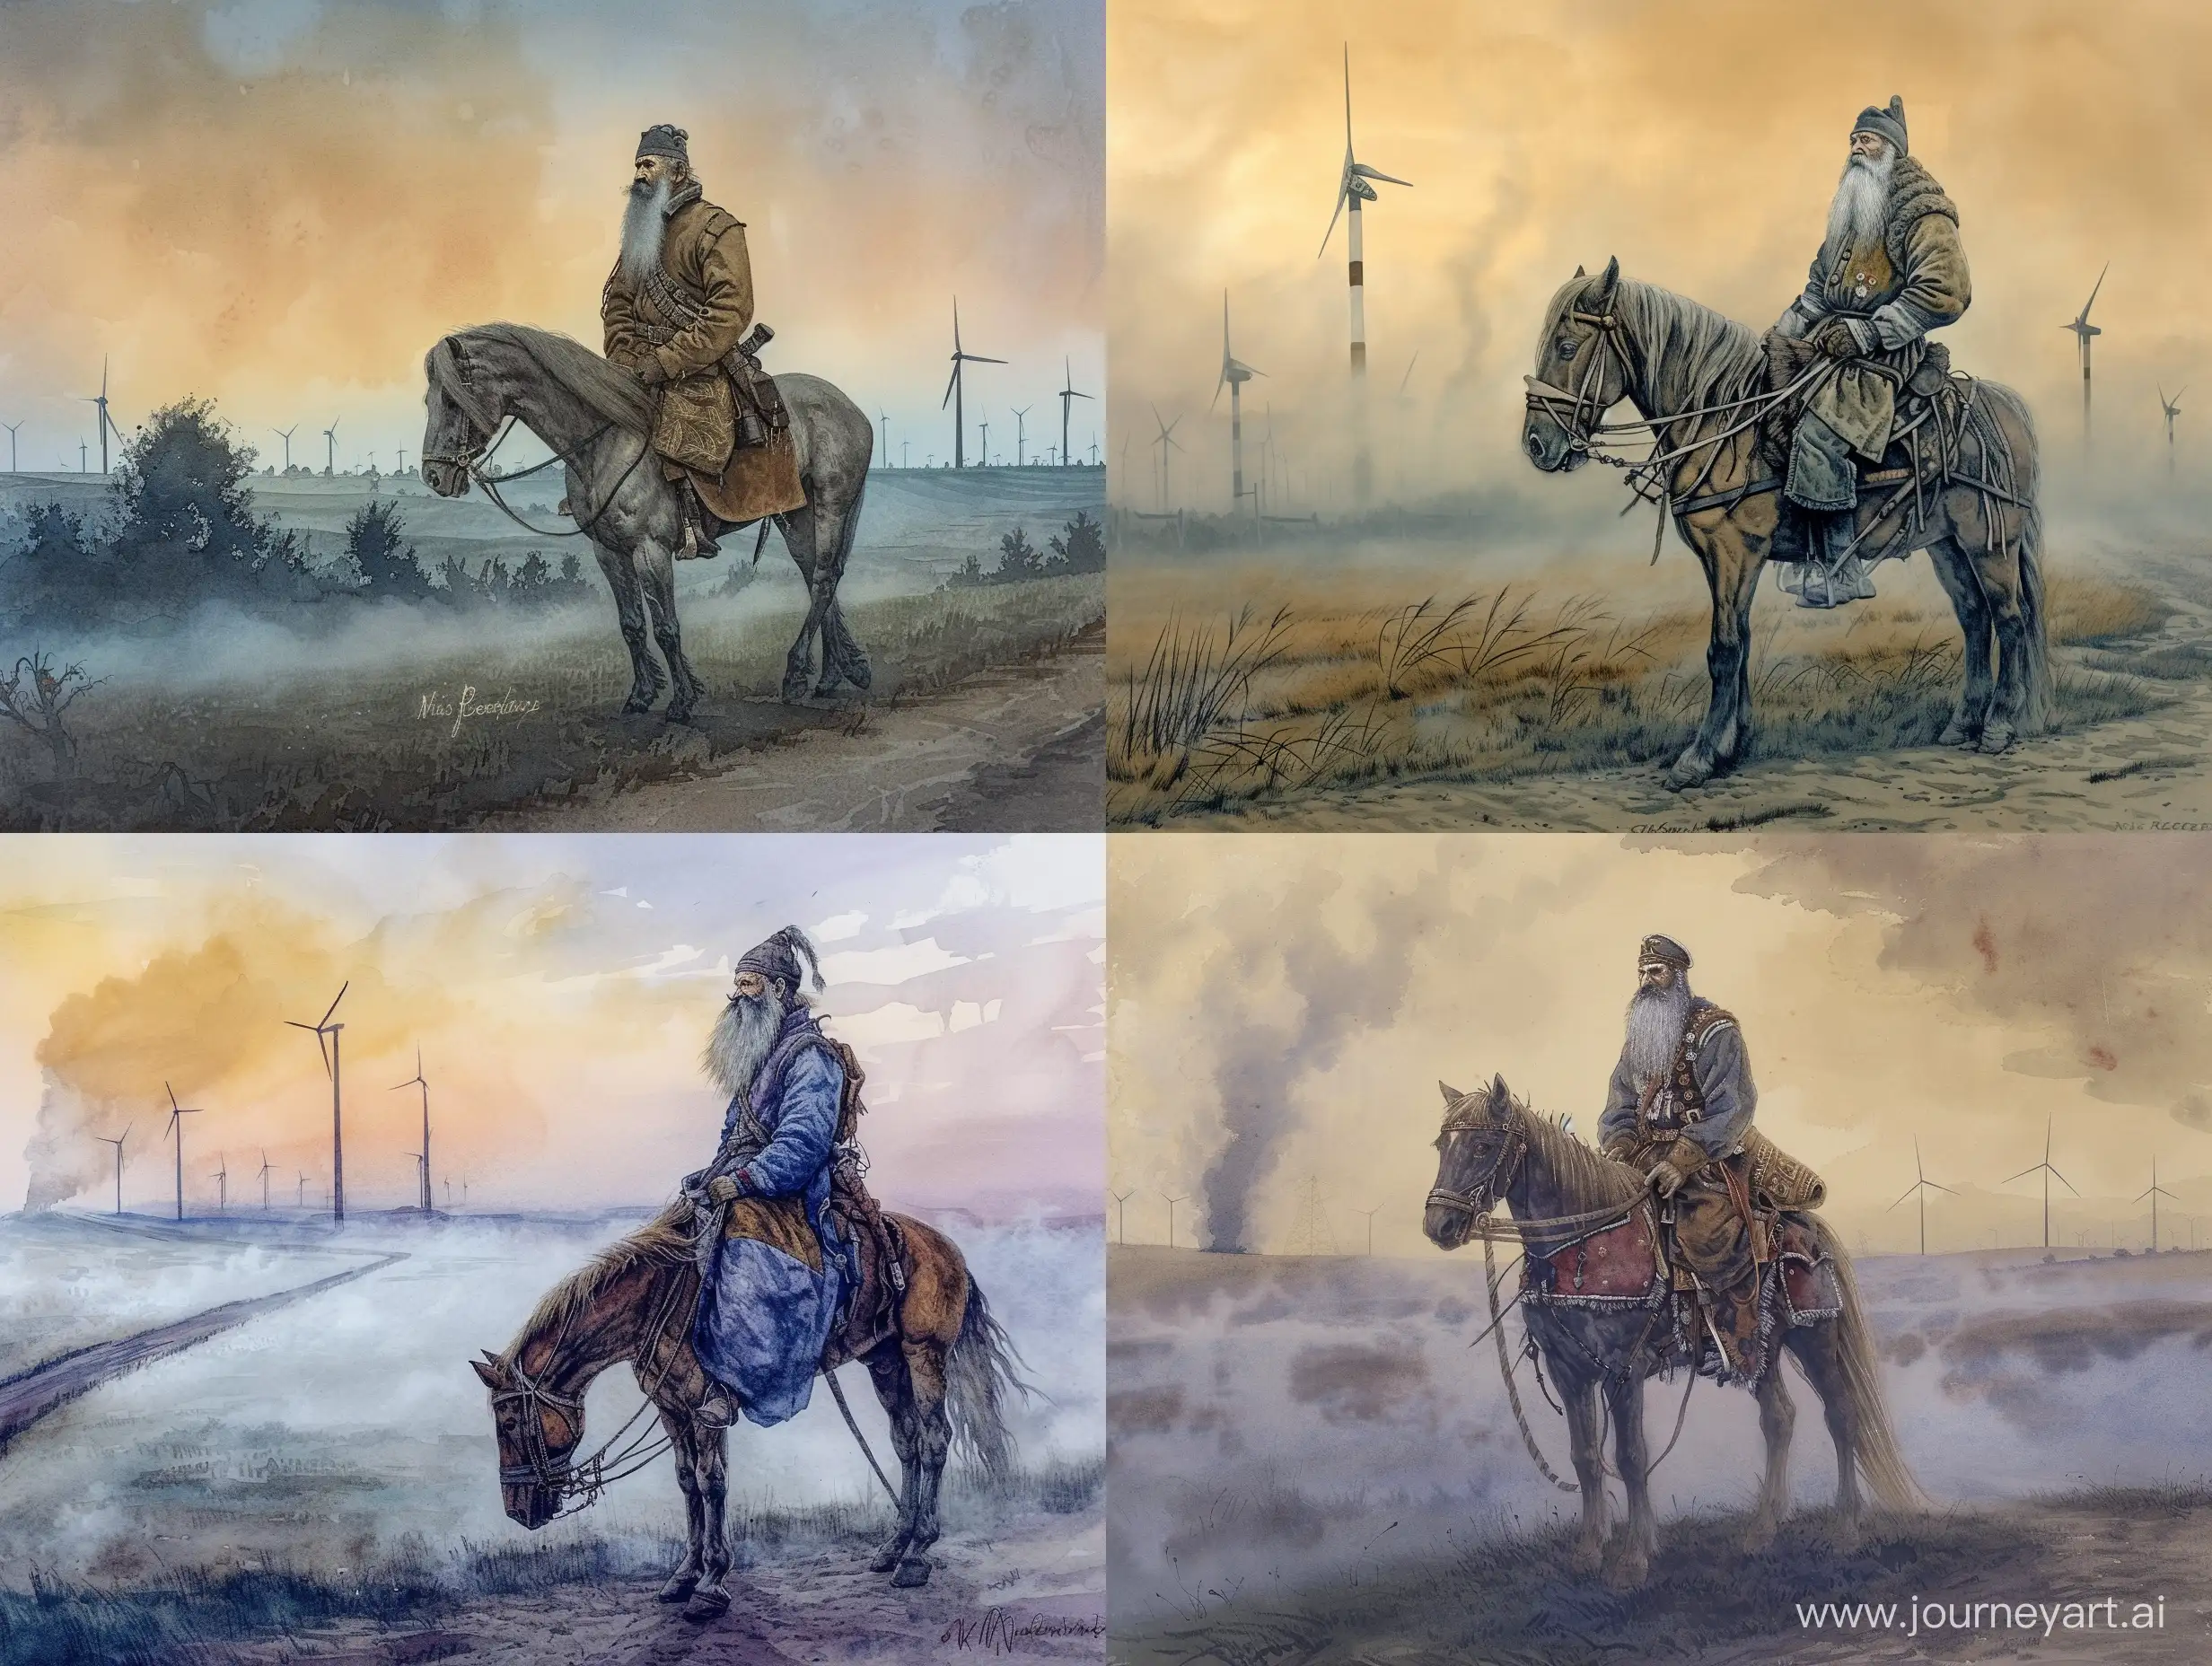 Mystical-Cossack-Rider-Amidst-Wind-Turbines-in-Watercolor-Style